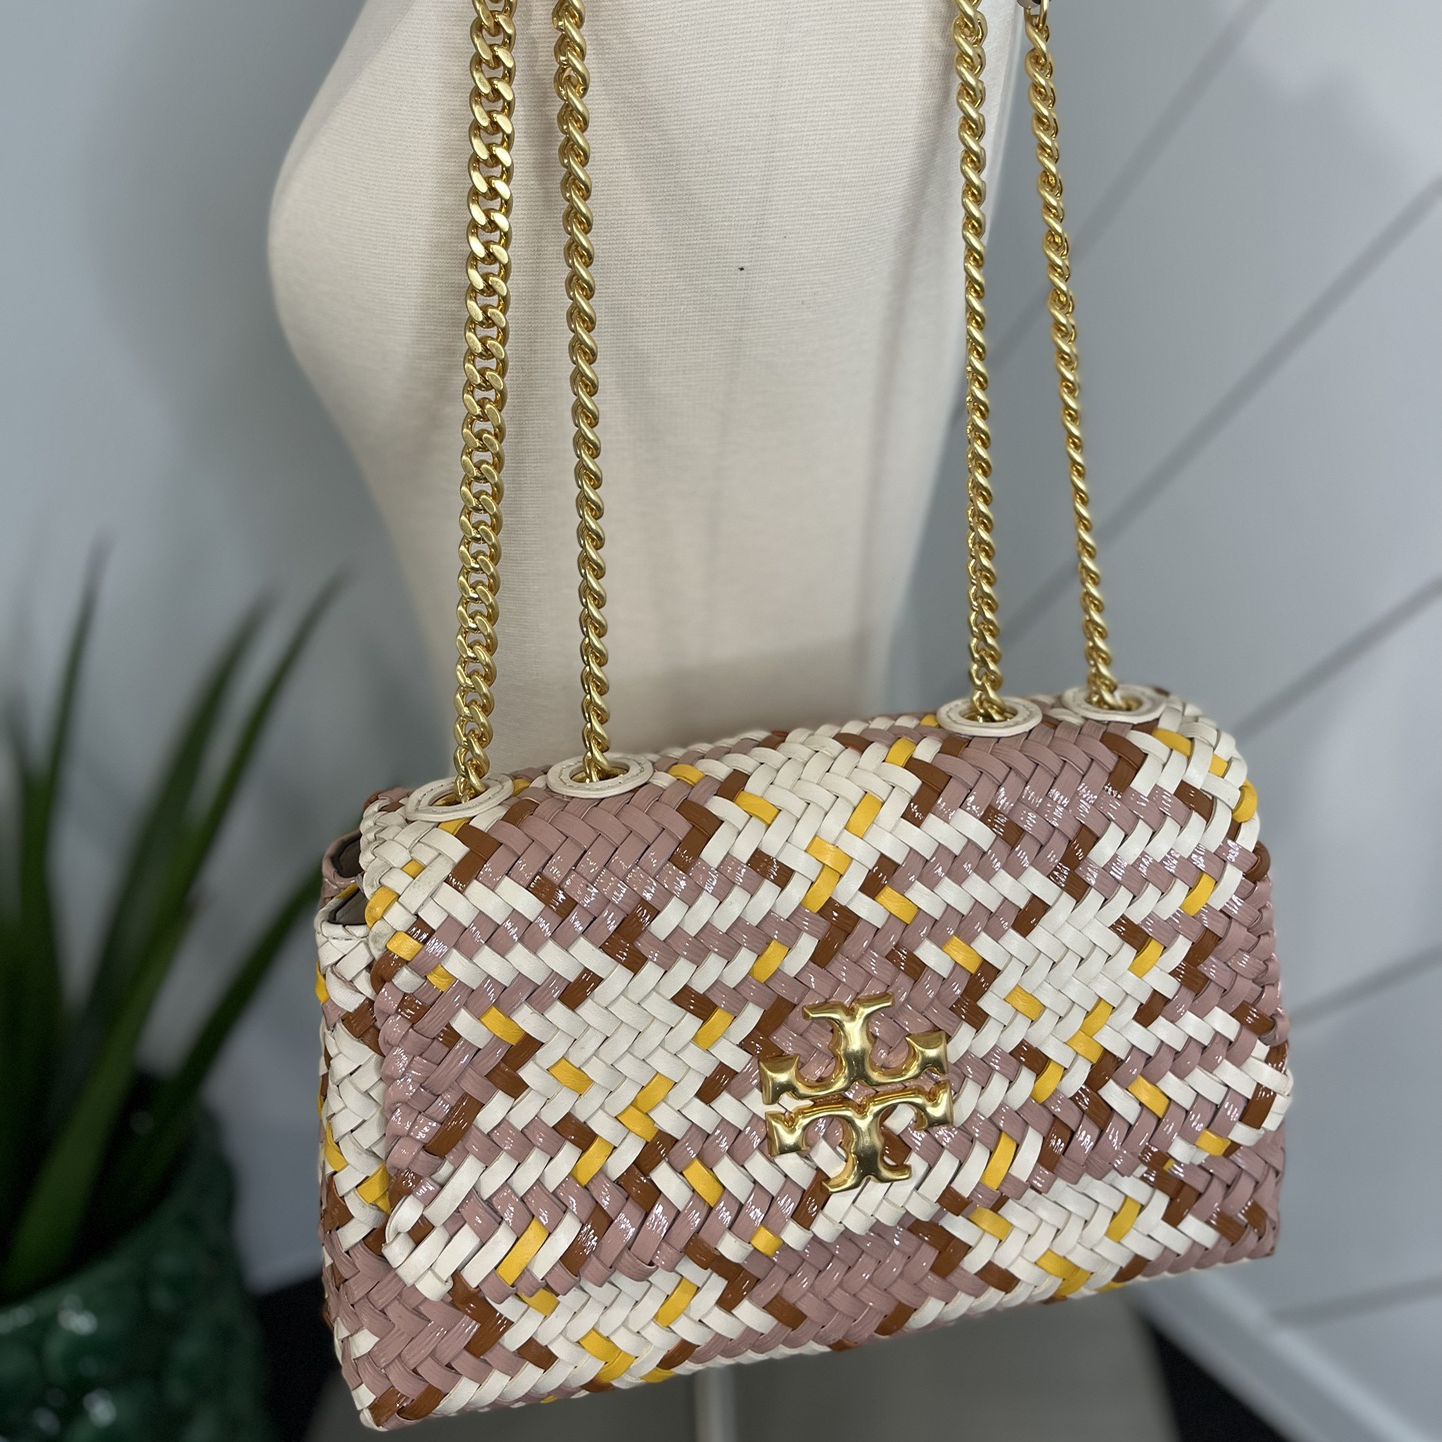 Tory Burch - Kira Woven Small Convertible Shoulder Bag for Sale in Boca  Raton, FL - OfferUp